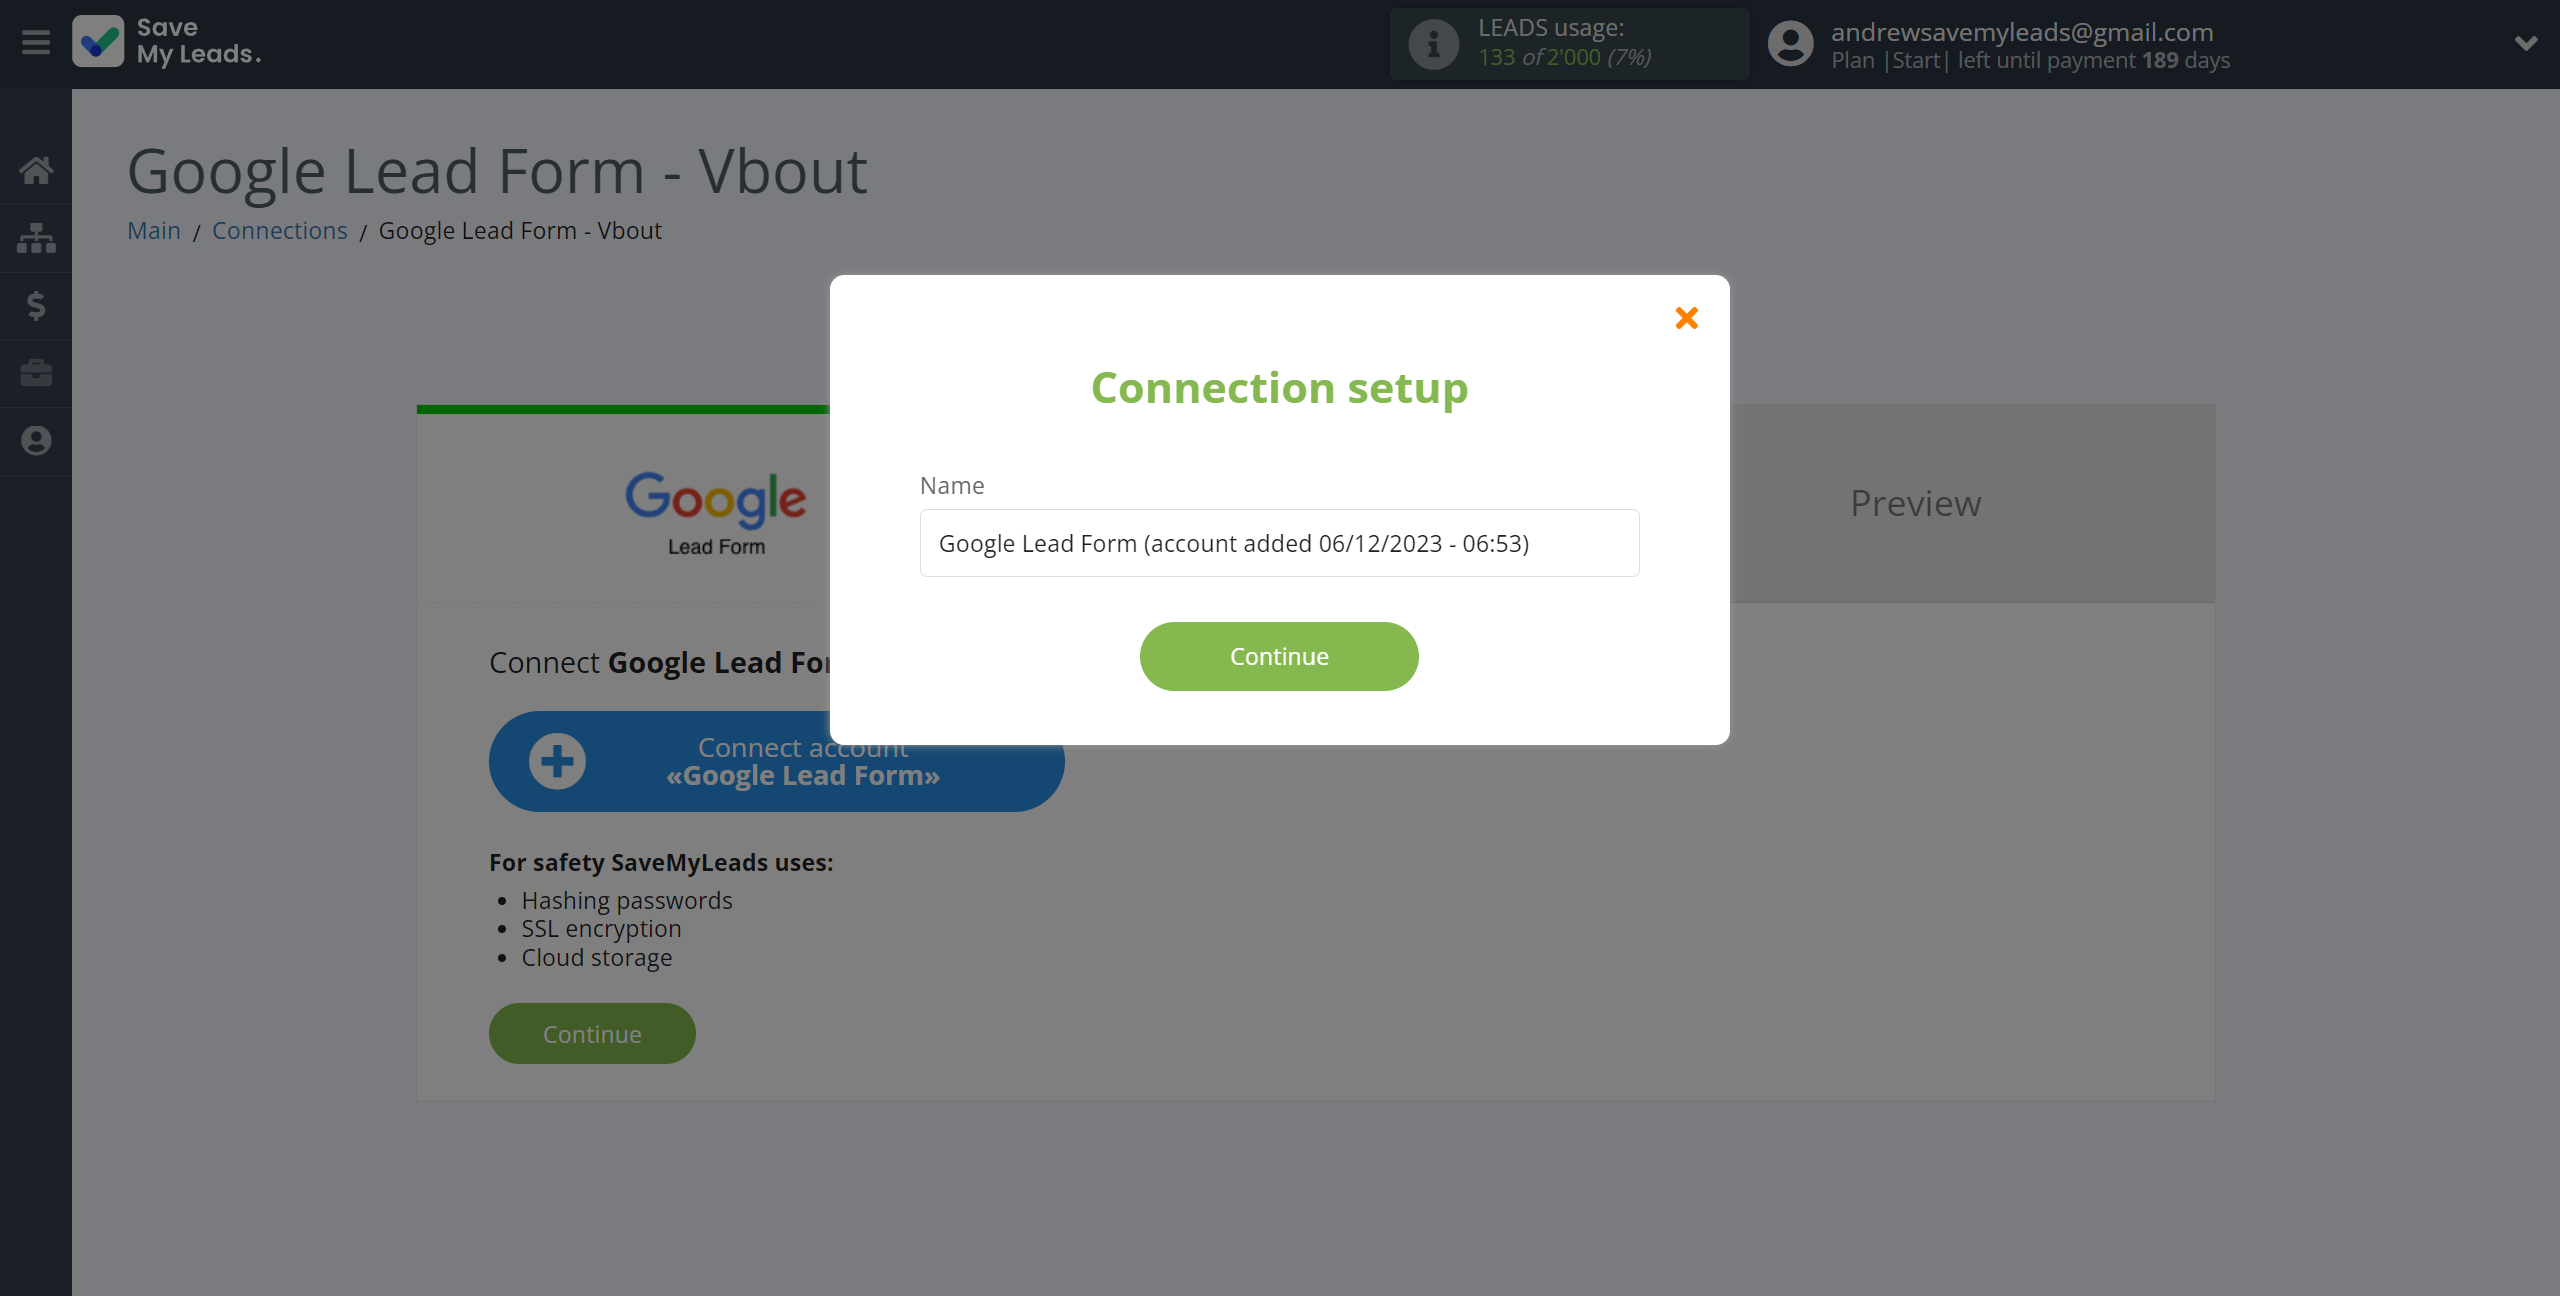 How to Connect Google Lead Form with Vbout Add Contact | Data Source account connection